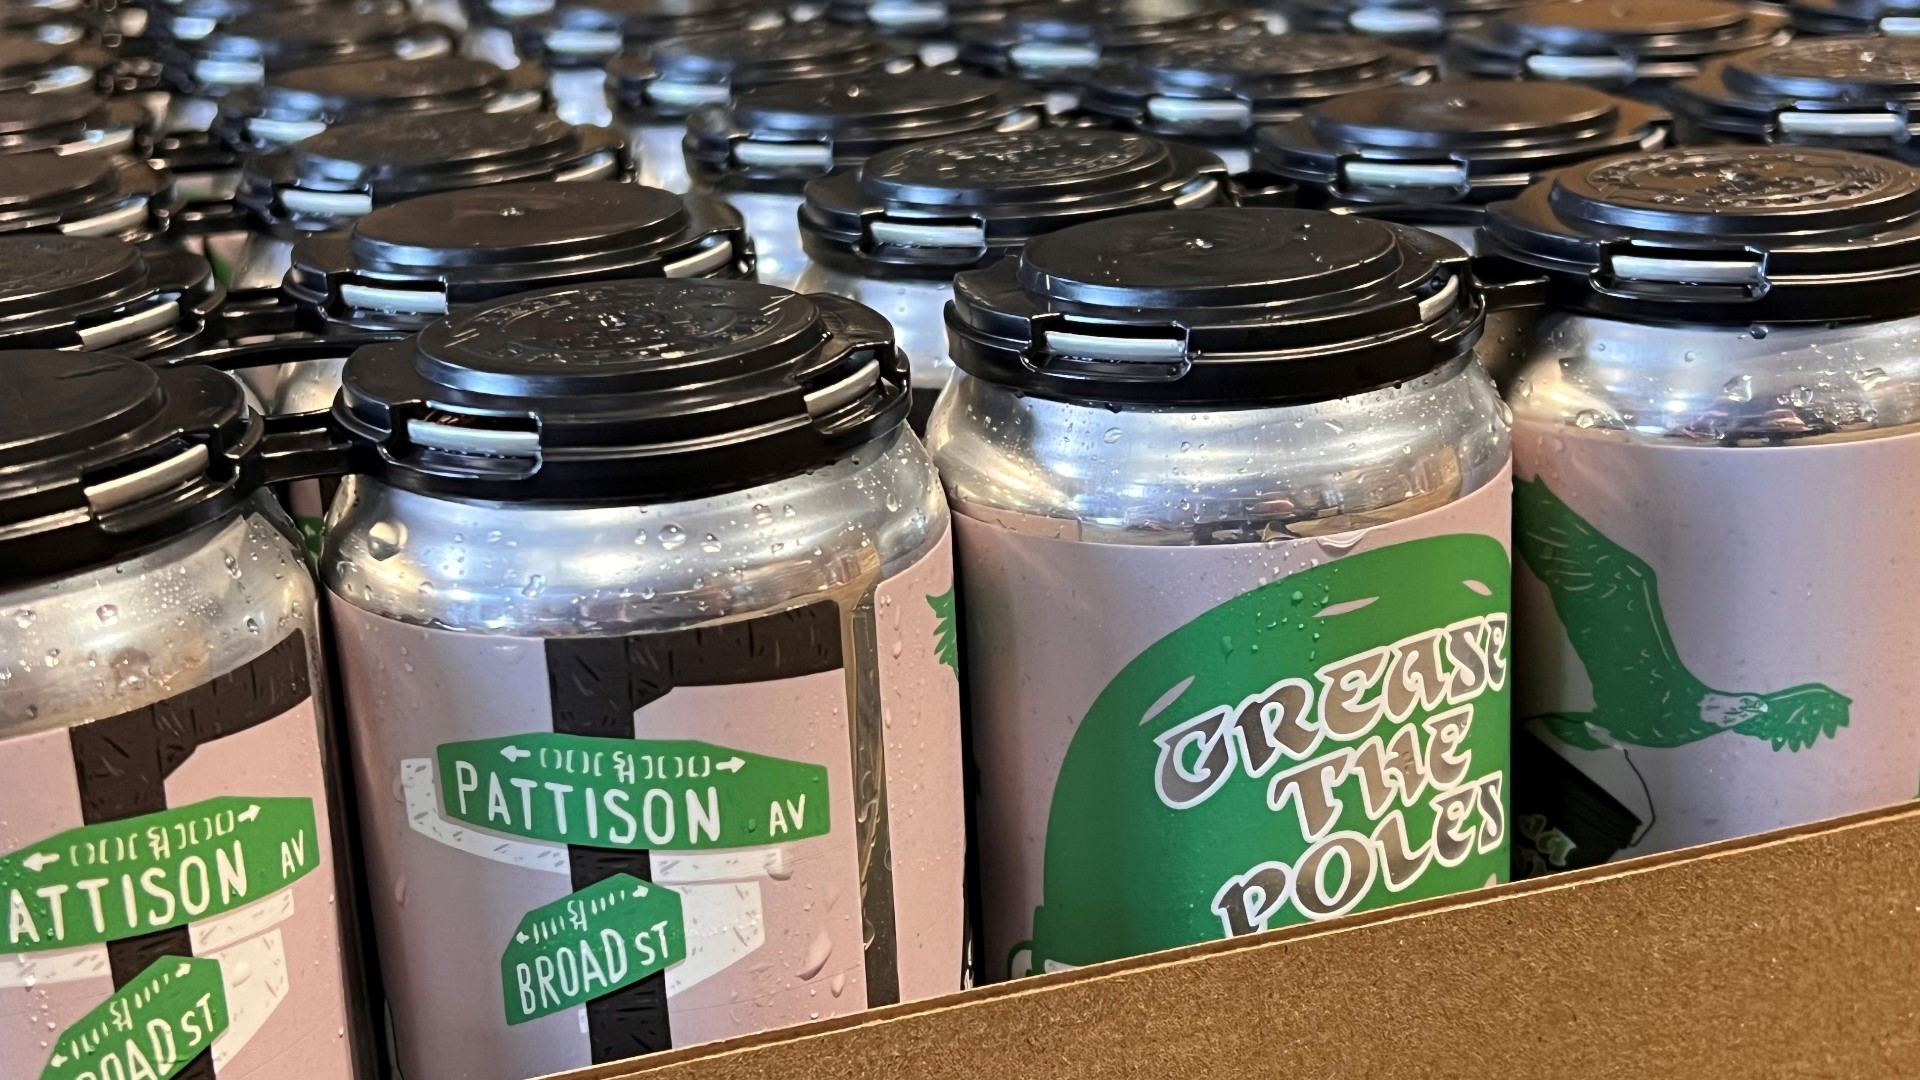 Philadelphia fans are known to enjoy a little liquid courage and celebrating big wins in a "greasy" way. Spring House Brewing Co.'s new beer combines both.